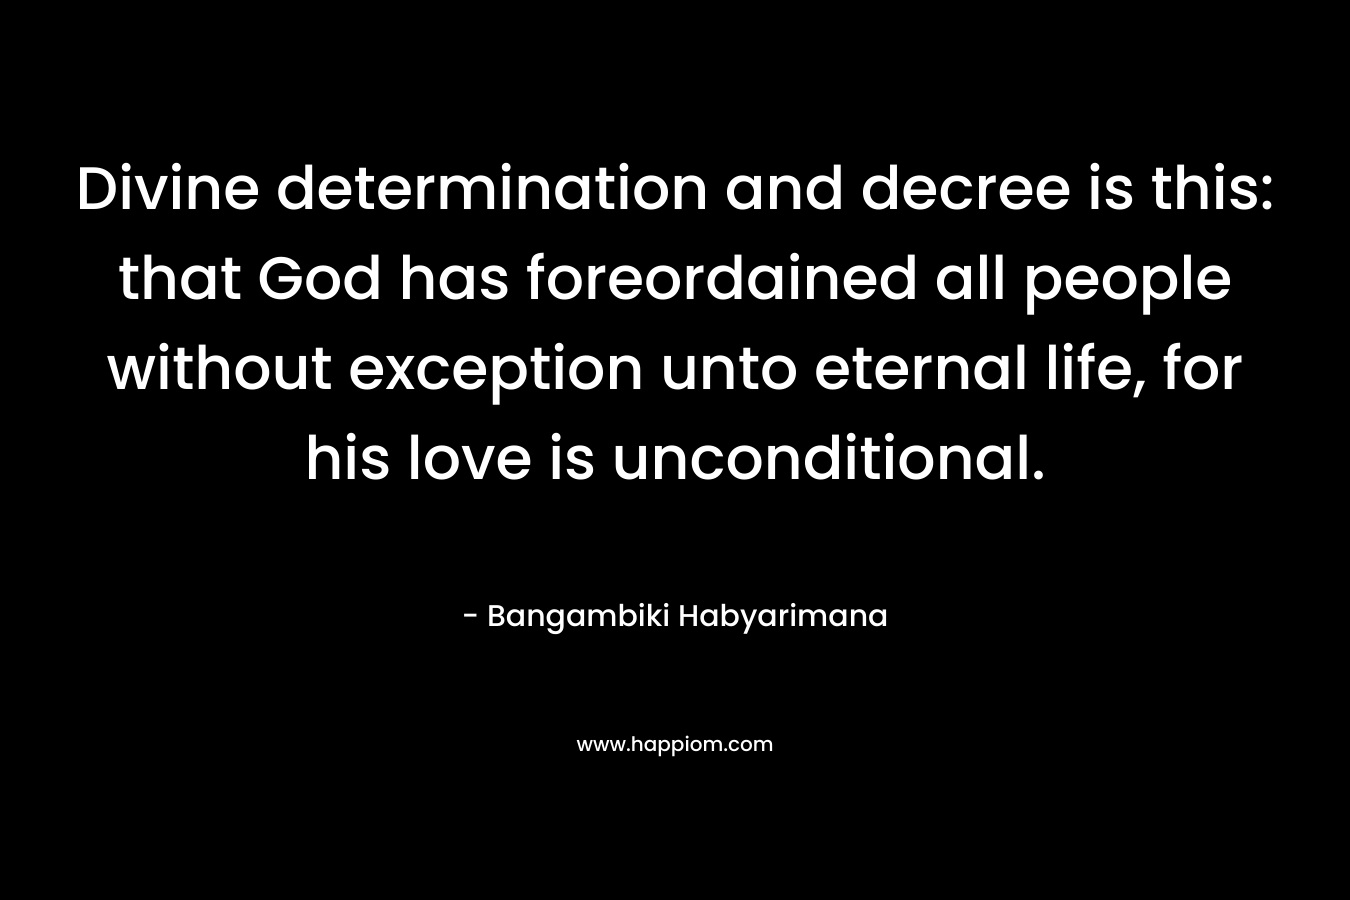 Divine determination and decree is this: that God has foreordained all people without exception unto eternal life, for his love is unconditional. – Bangambiki Habyarimana